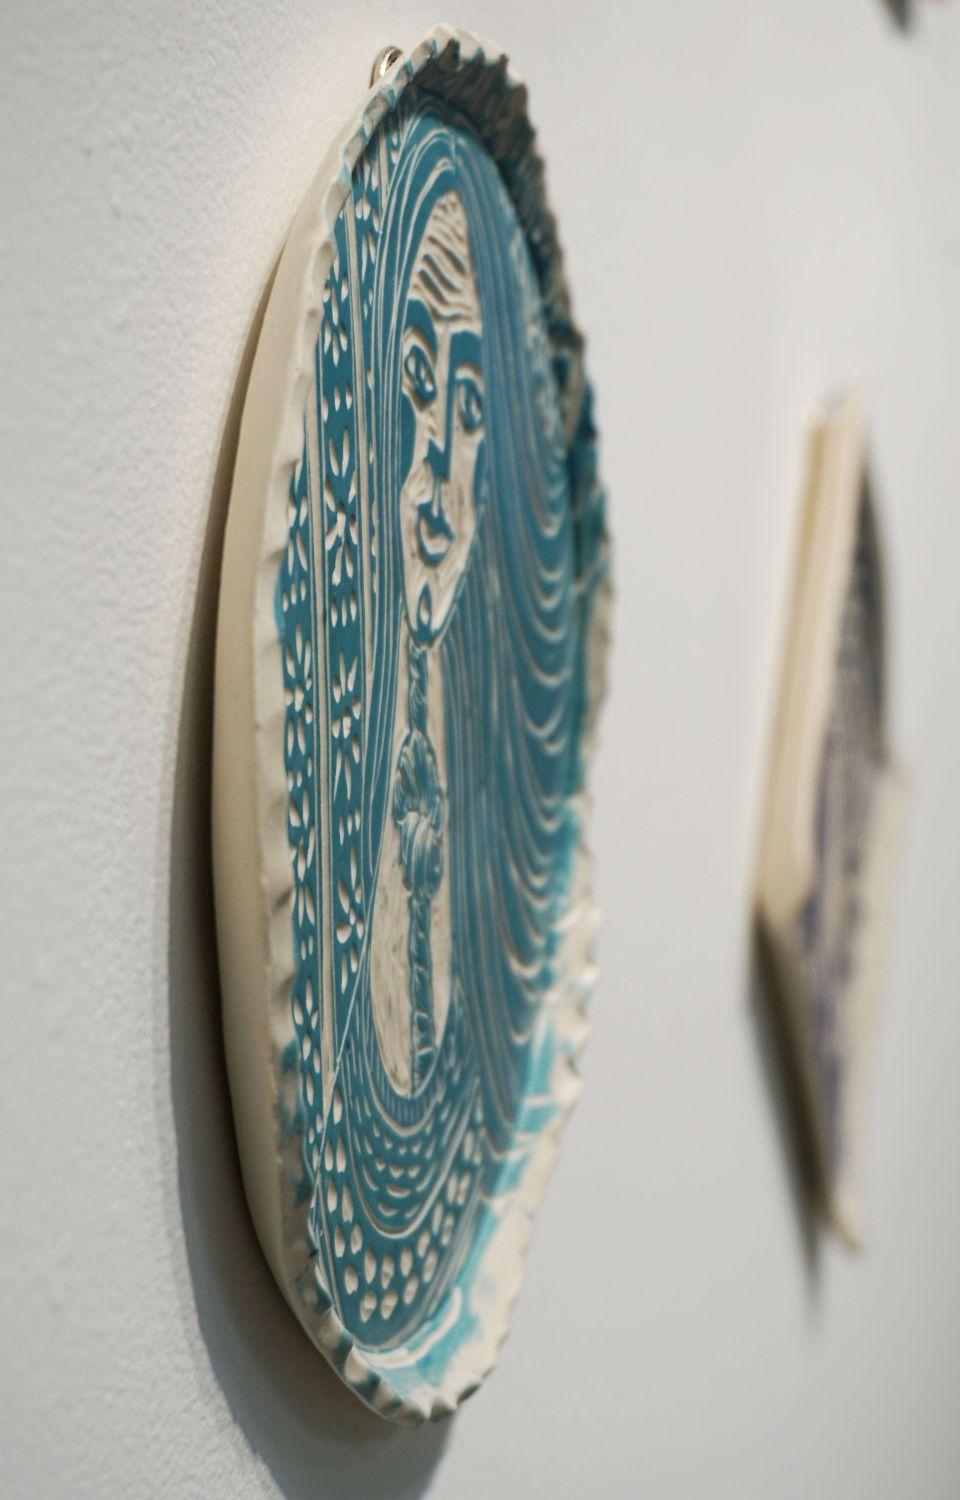 Our history here 
2018 
Hand carved porcelain plate 
One of a kind 

Her poetic porcelain plates examine and reimagine the history of art in a way that values women, not only in body, but in wholeness, power, and love. Focusing on the narrative